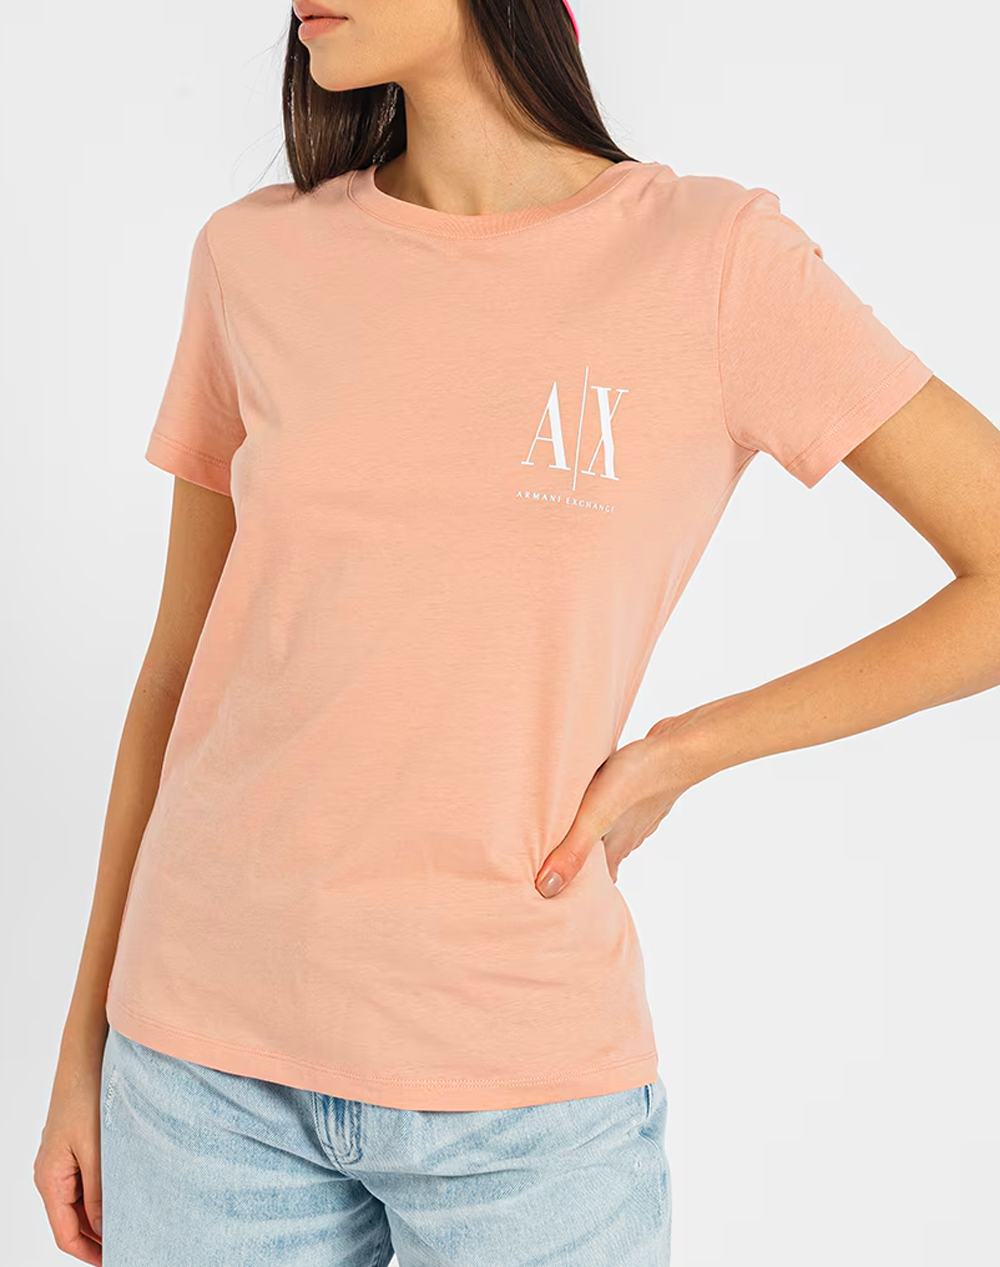 ARMANI EXCHANGE T-SHIRT 8NYTFXYJG3Z-14BD Coral 3810AARME3400133_XR27825